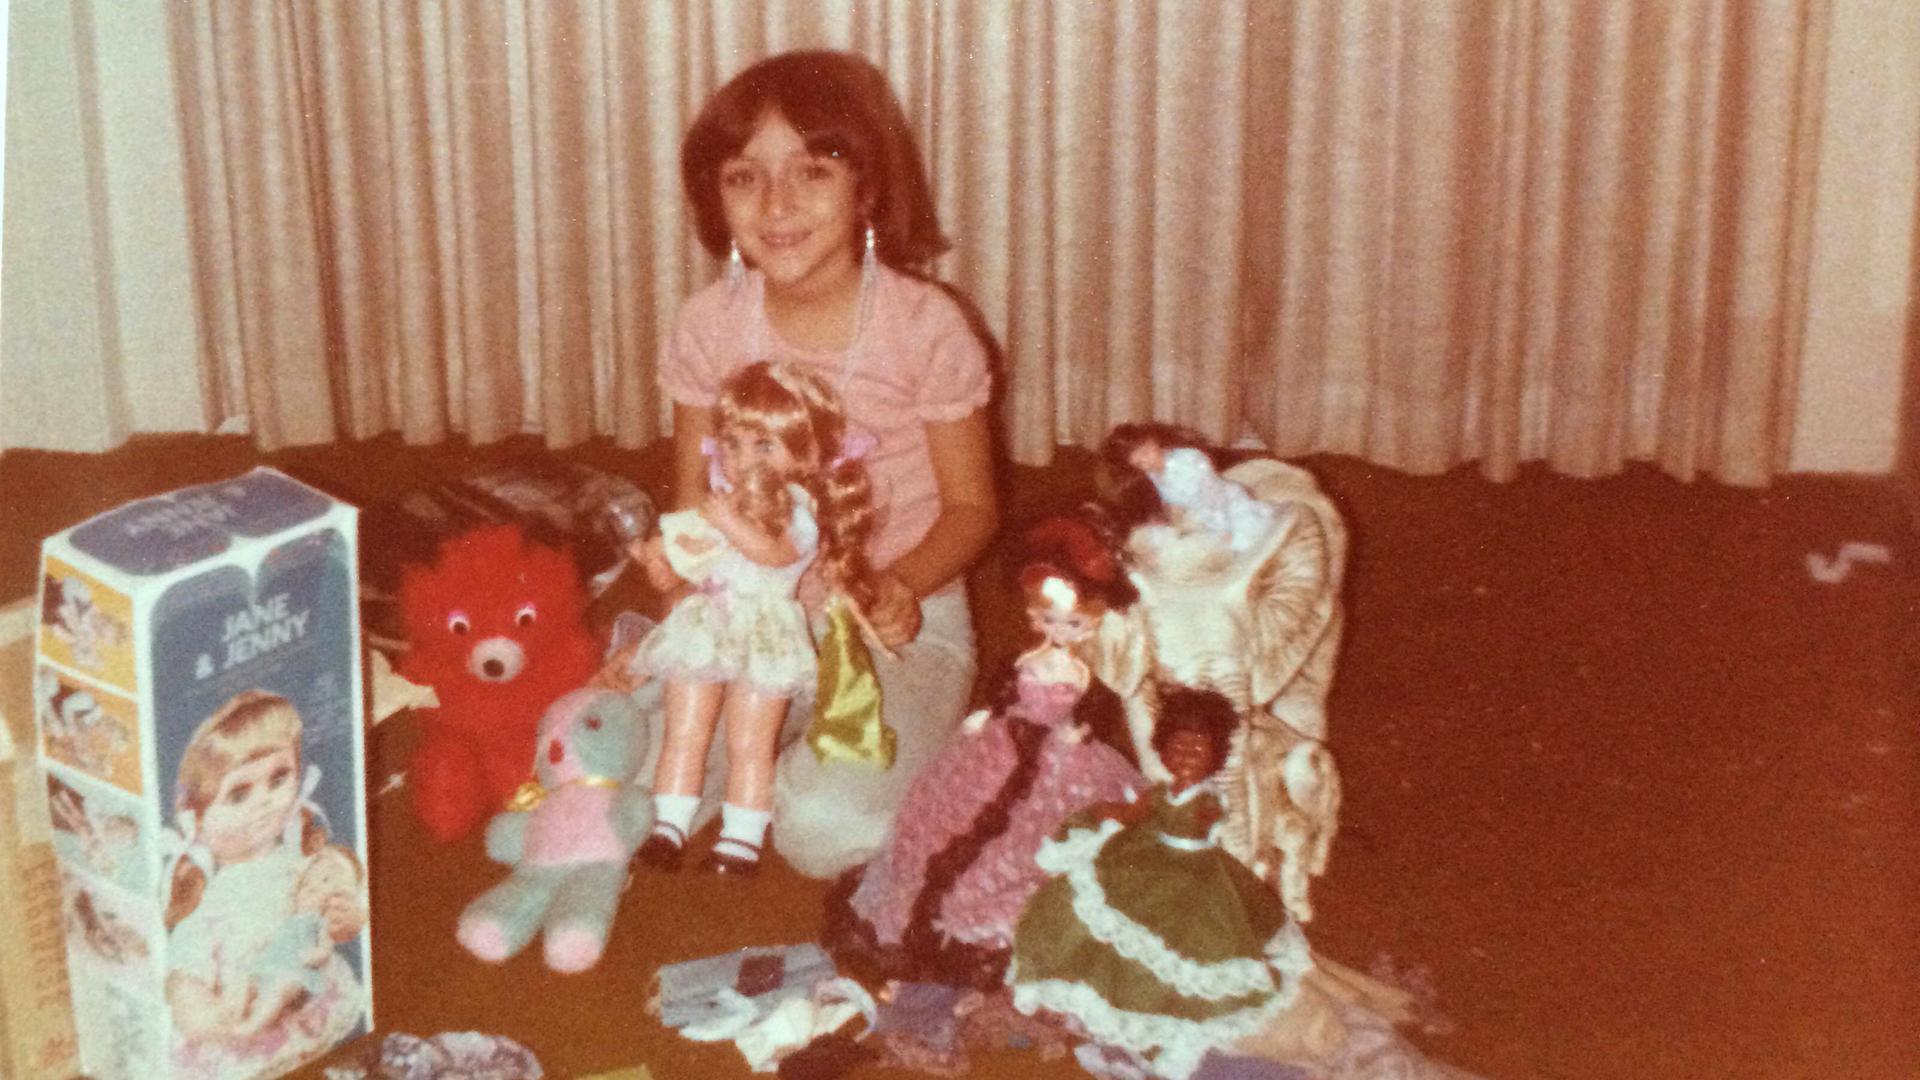 Eight-year-old Susan Cruz enjoying her first Christmas in the United States in 1978.